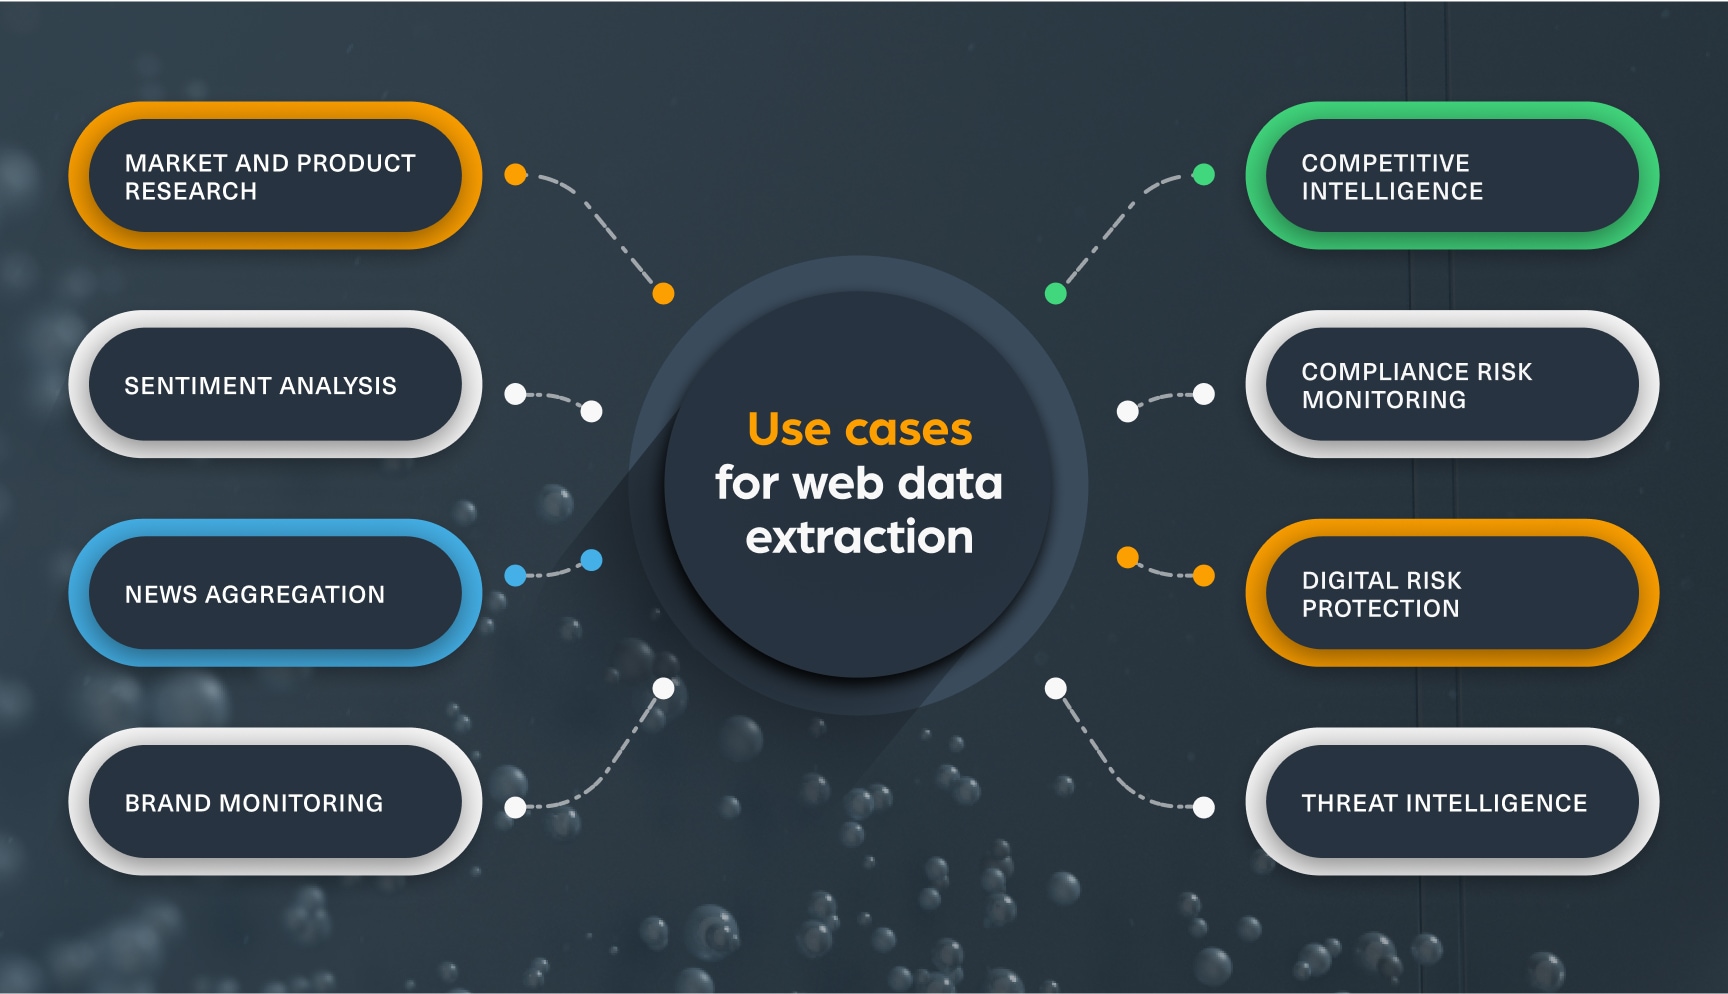 Use cases for web data extraction include market and product research, sentiment analysis, news aggregation, brand monitoring, competitive intelligence, compliance risk monitoring, digital risk protection, and threat intelligence.